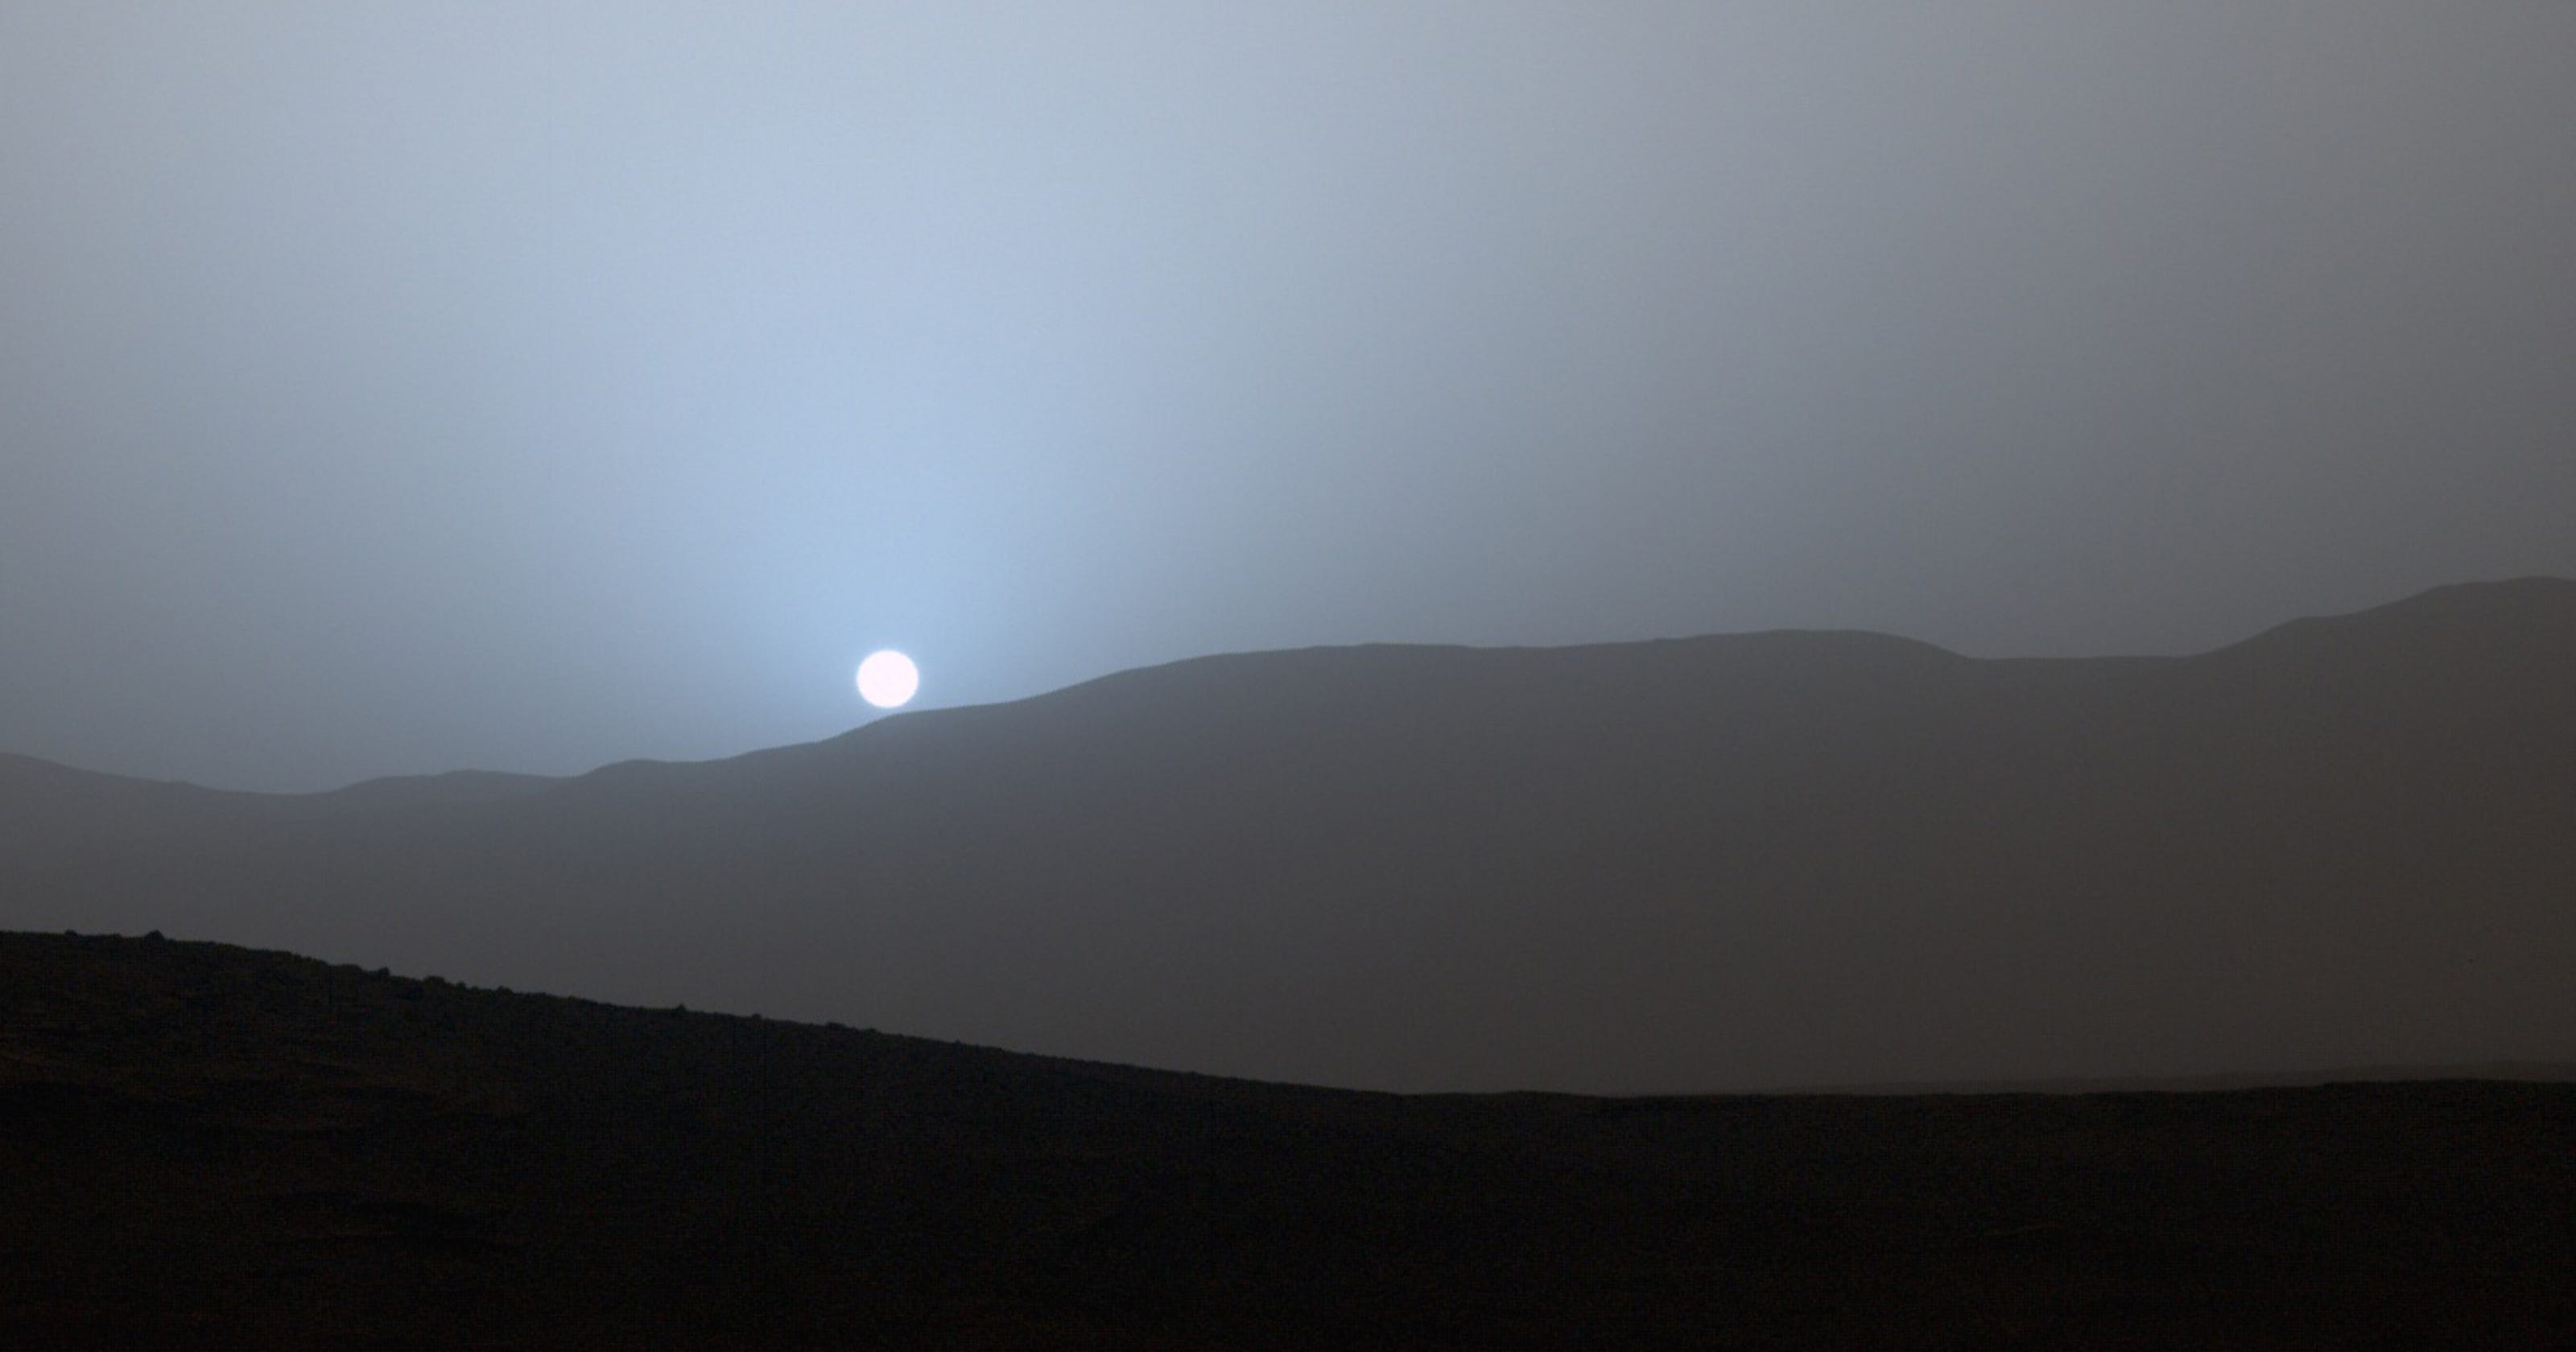 Mars sunset photo: We are first humans to see a Mars sunset but ...